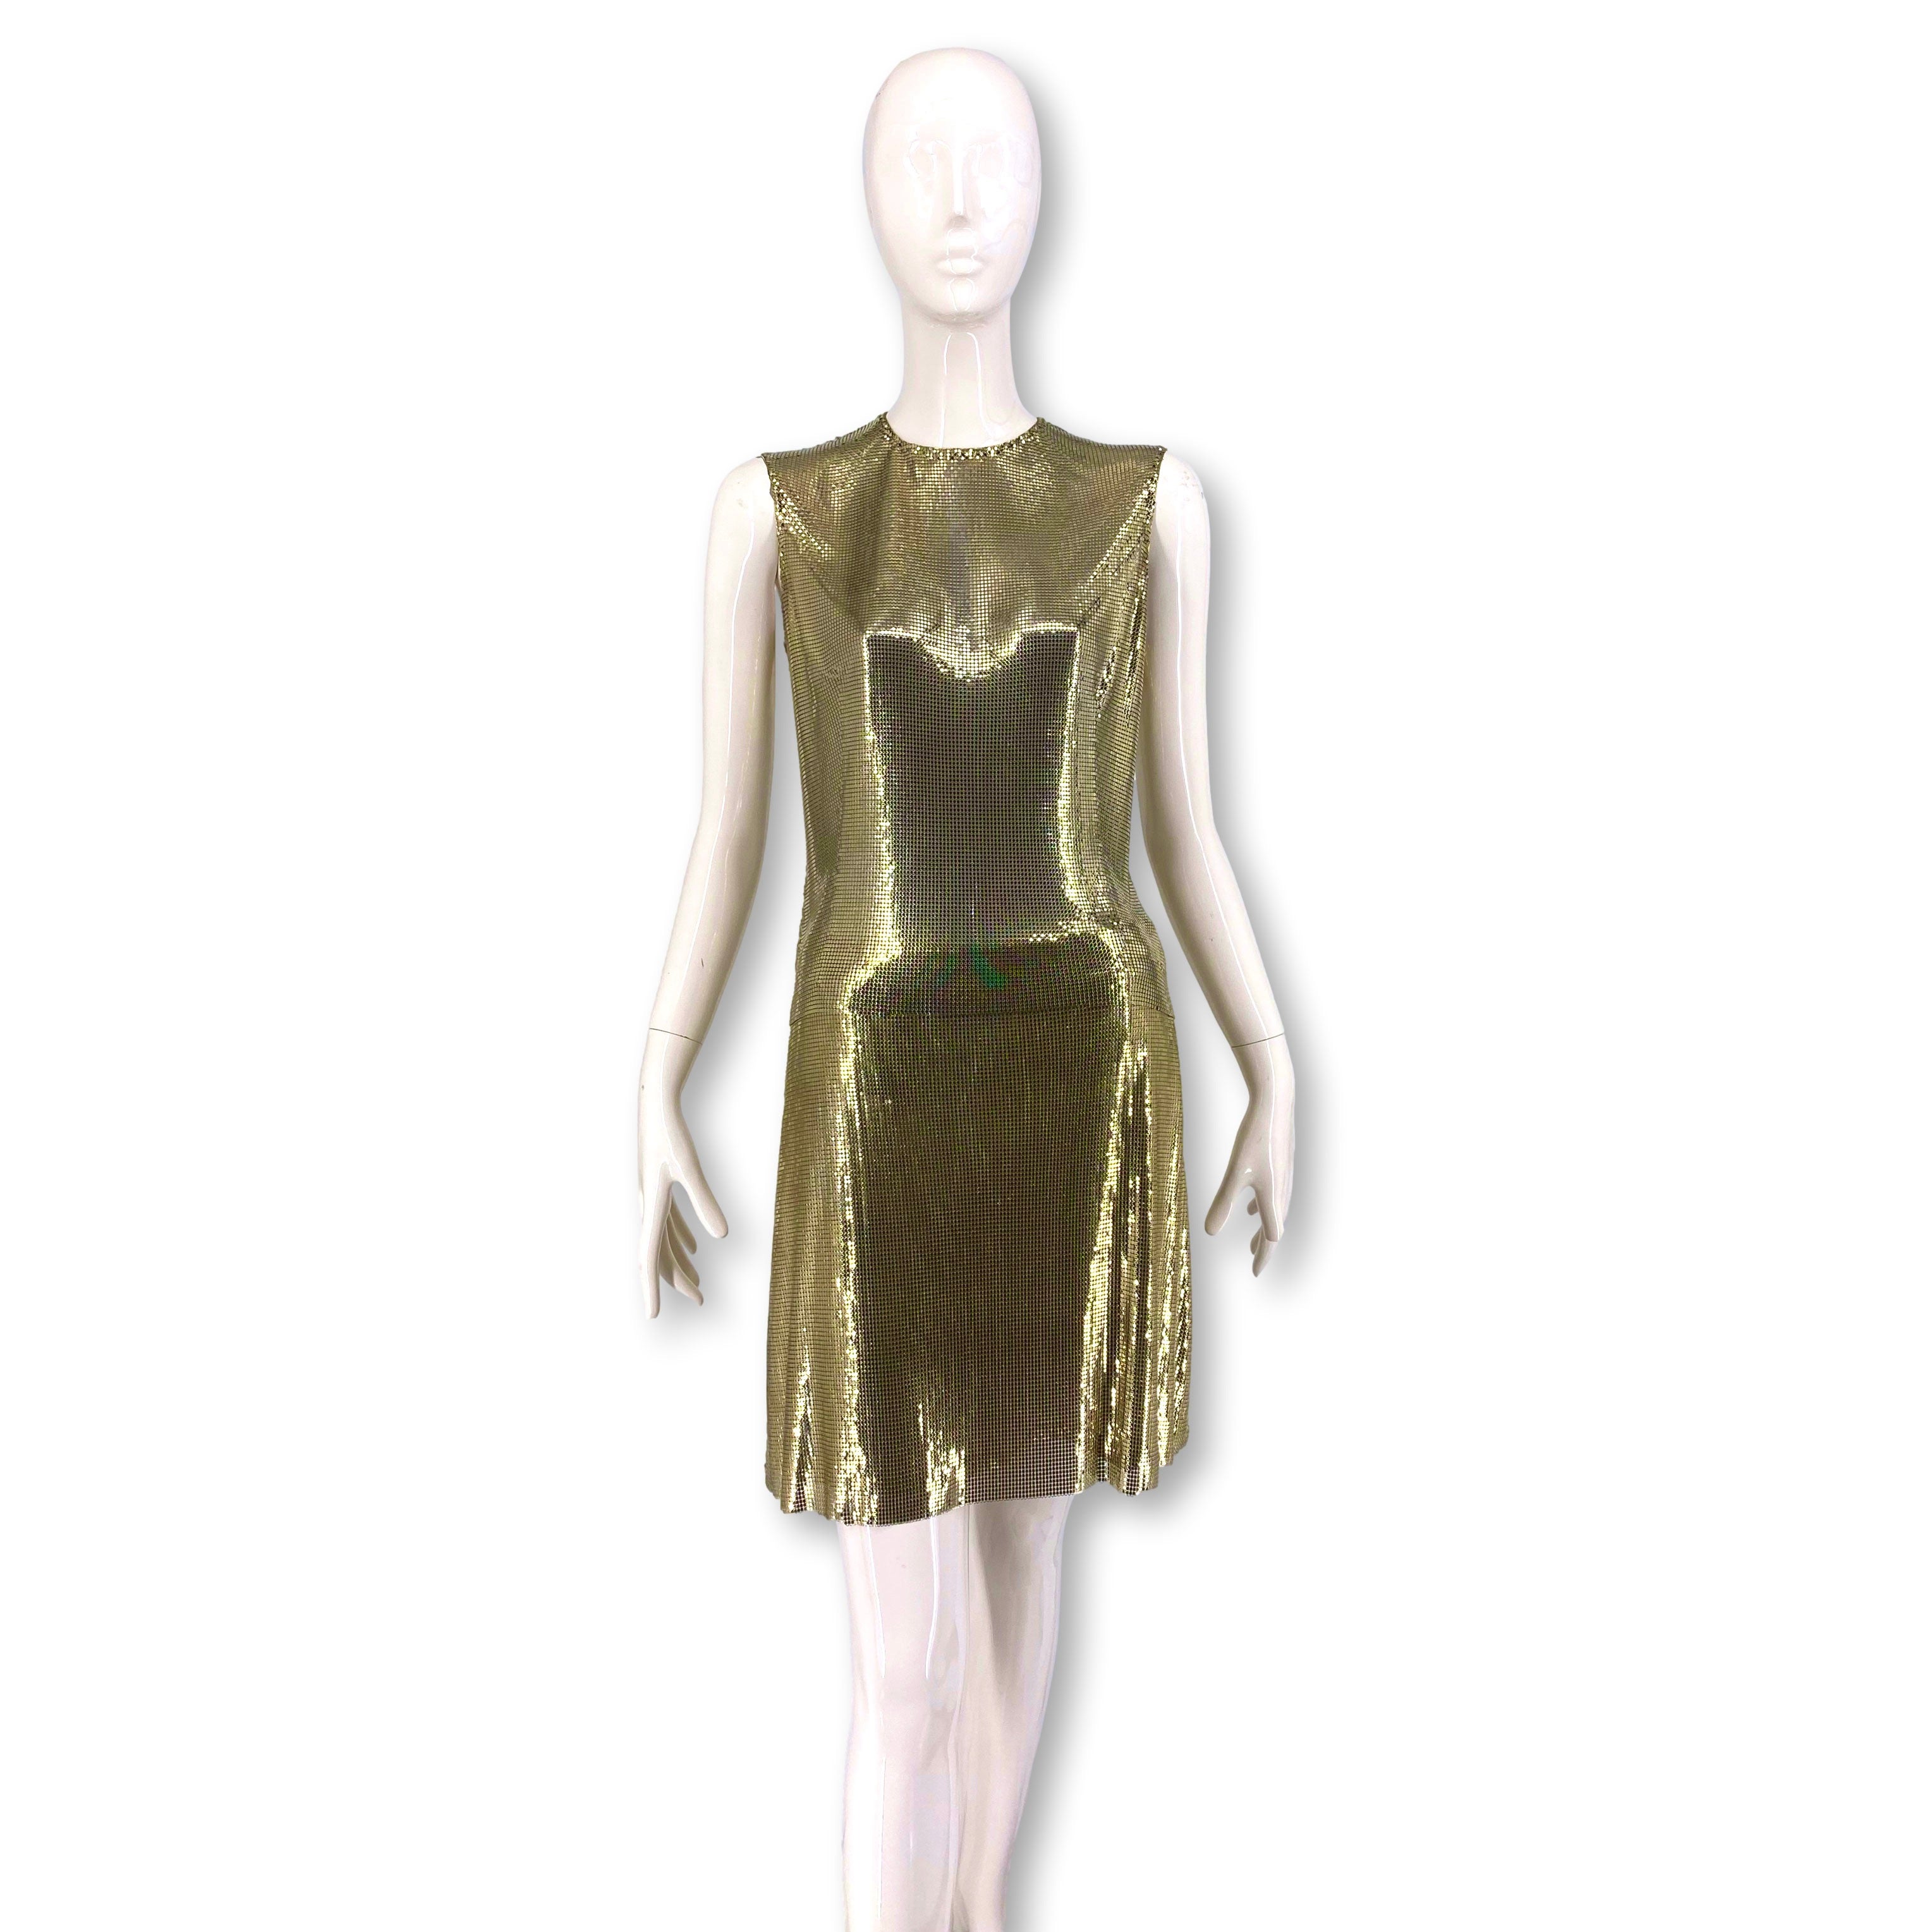 A rare 1994 F/W Gianni Versace Couture gold metal Oroton chainmail top and skirt ensemble - seen on the model Amber Valetta in listing photo #4 - an editorial photo of the collection from 1994. The 2-piece can be worn as separates or with the